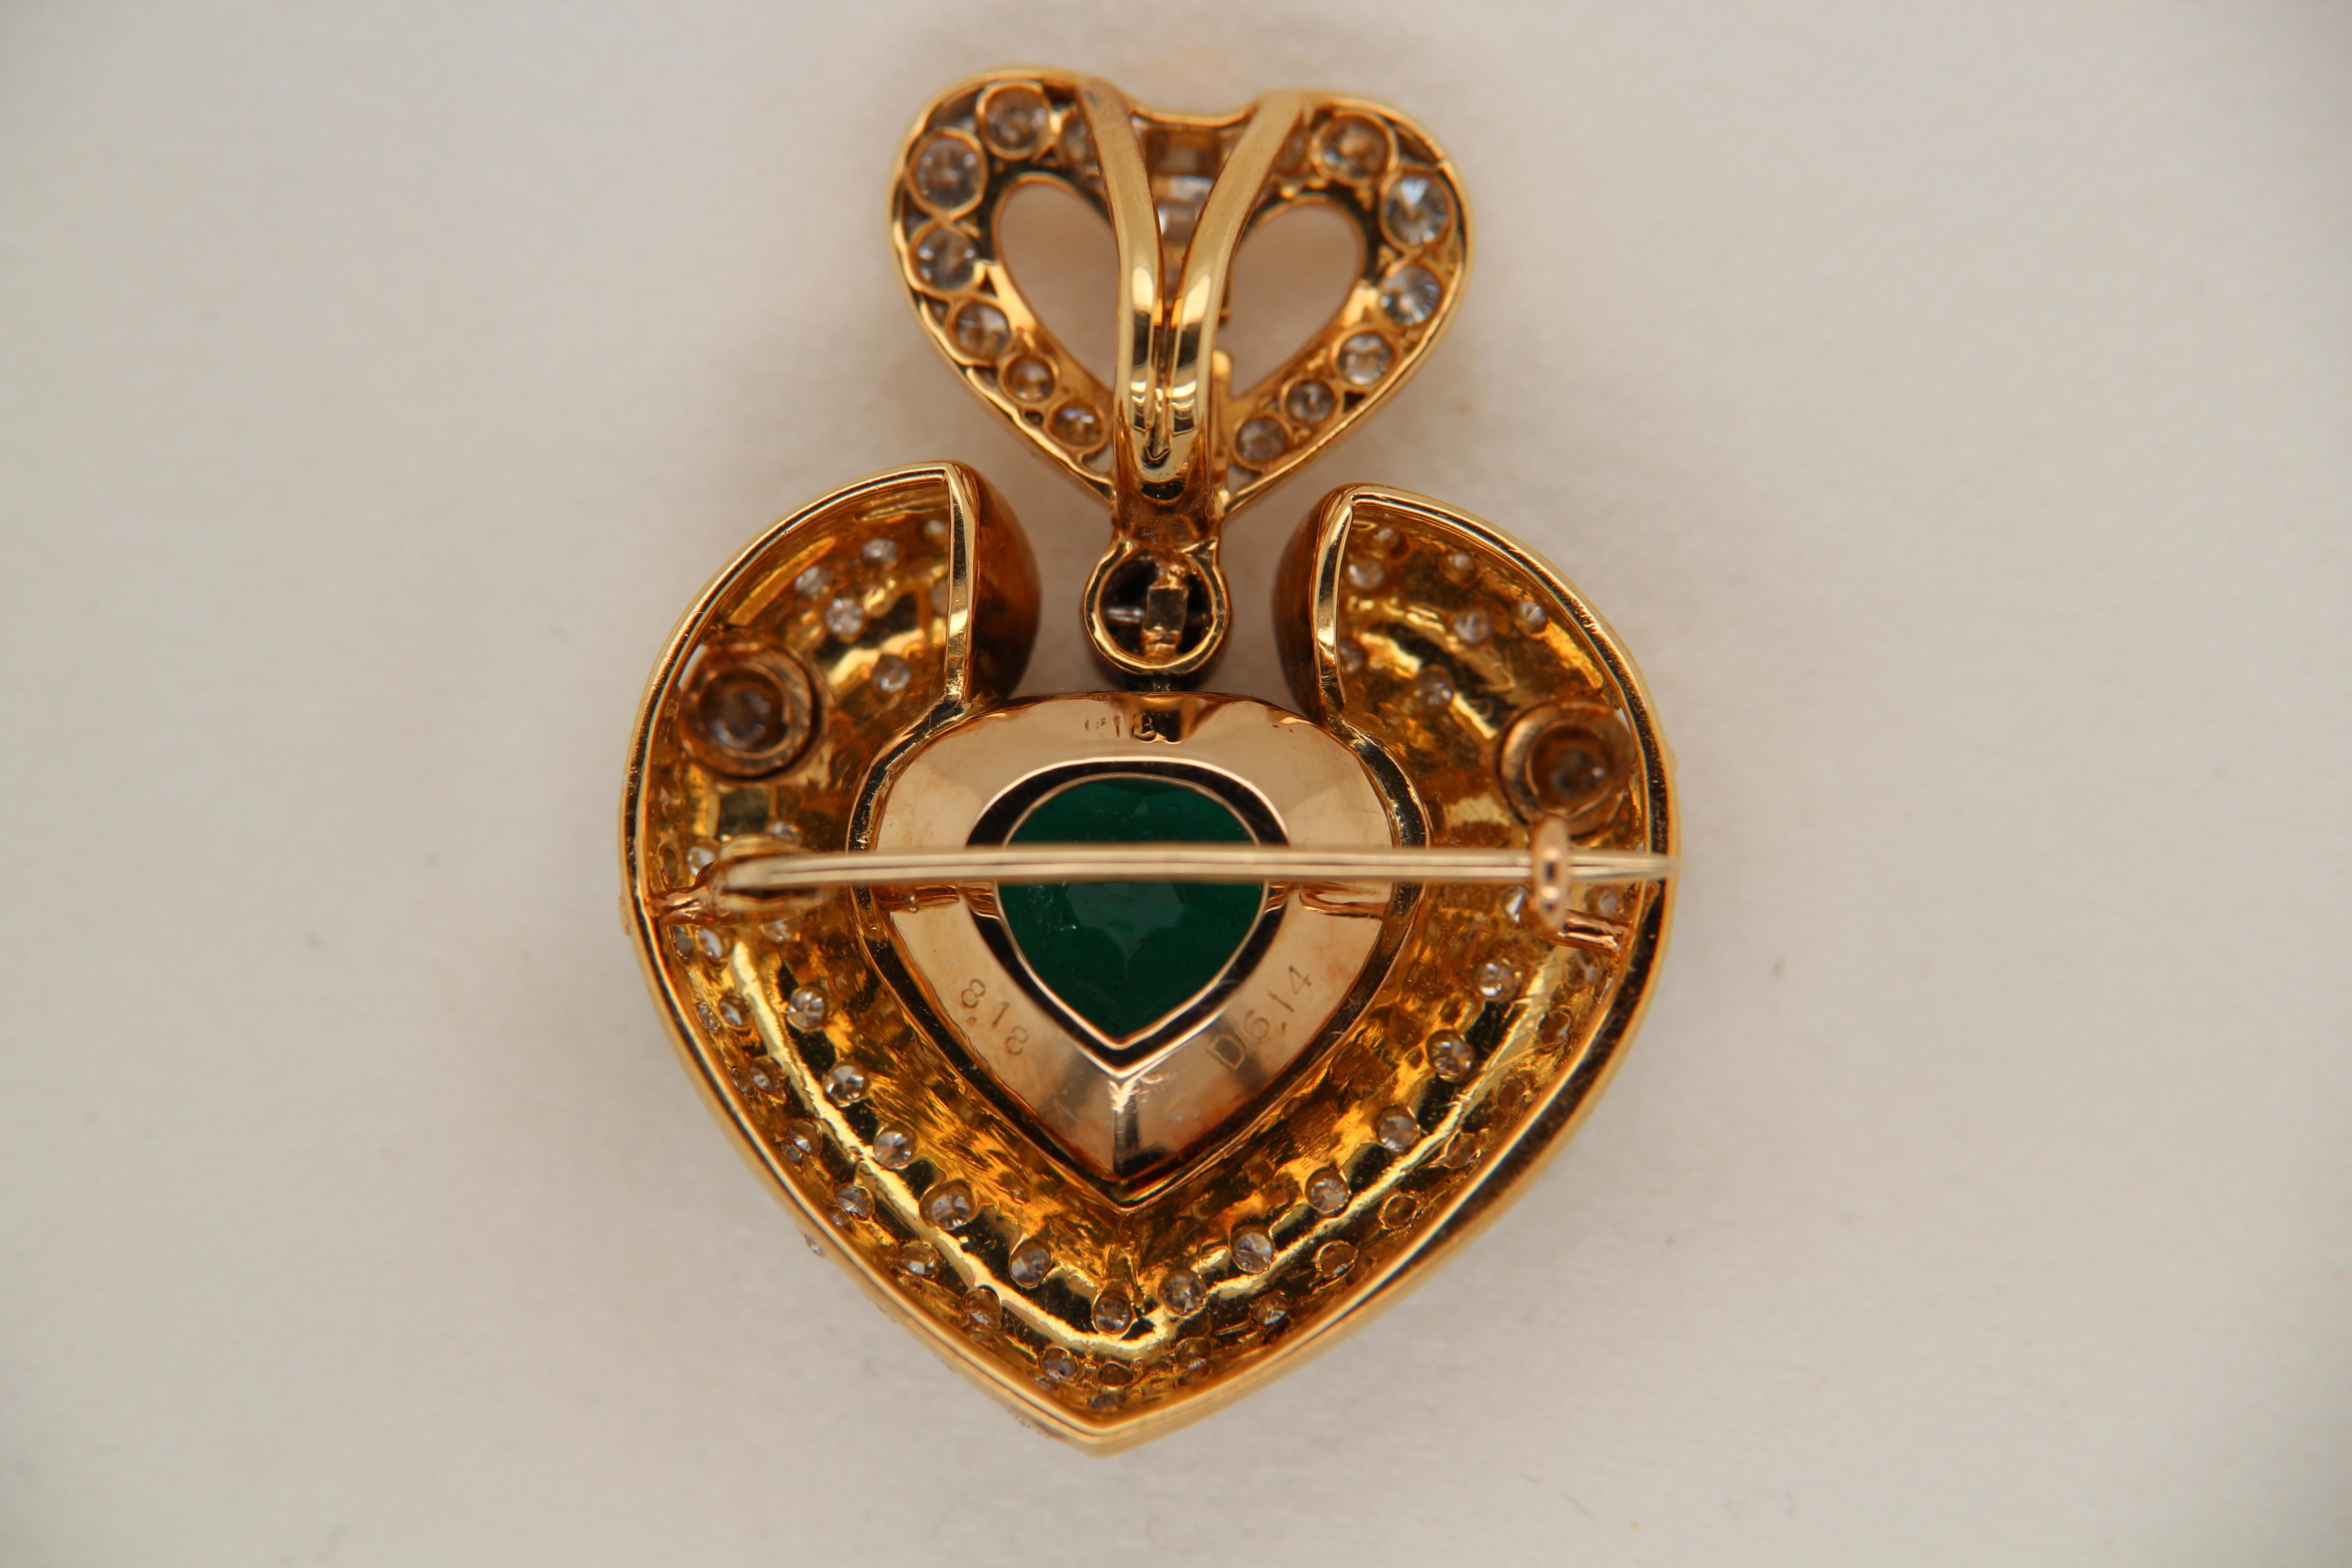 A brand new emerald and diamond pendant in 18 karat gold. The centre stone is an 8.18 carat Colombian emerald with minor oil certified by GRS, Gem Research-lab Switzerland. The total diamond weight is 1.45 carats and the whole pendant weighs 19.98